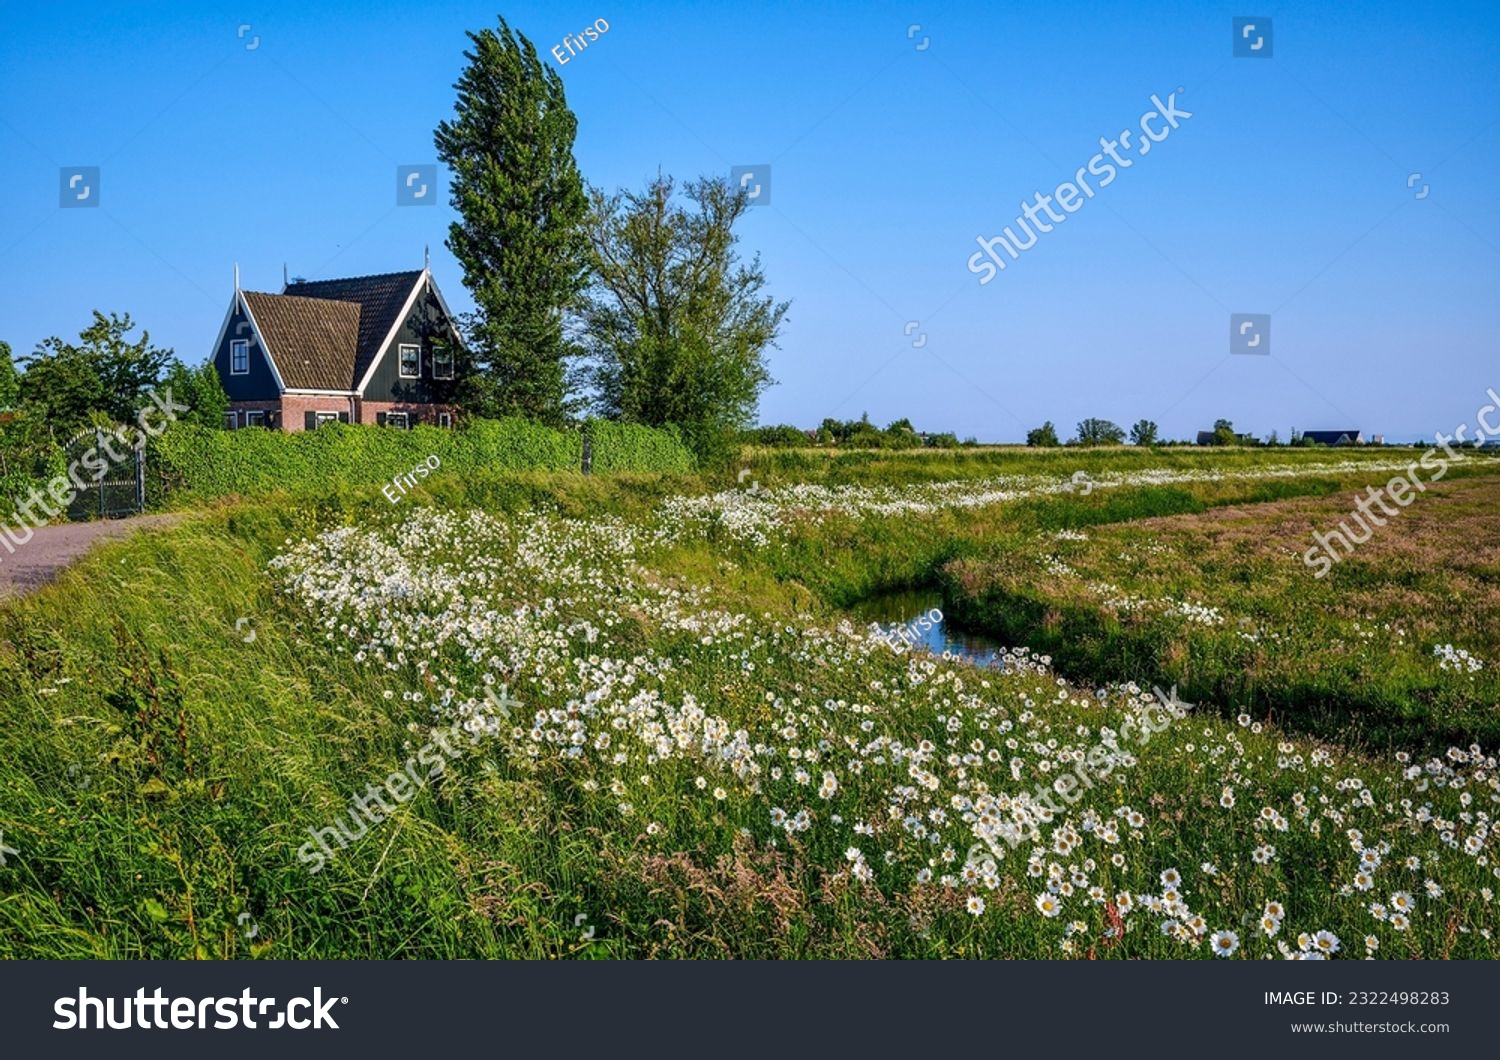 A house in the village by the river. Rural house in clear day. Country house in summer meadow. Meadow grass around countryside house #2322498283